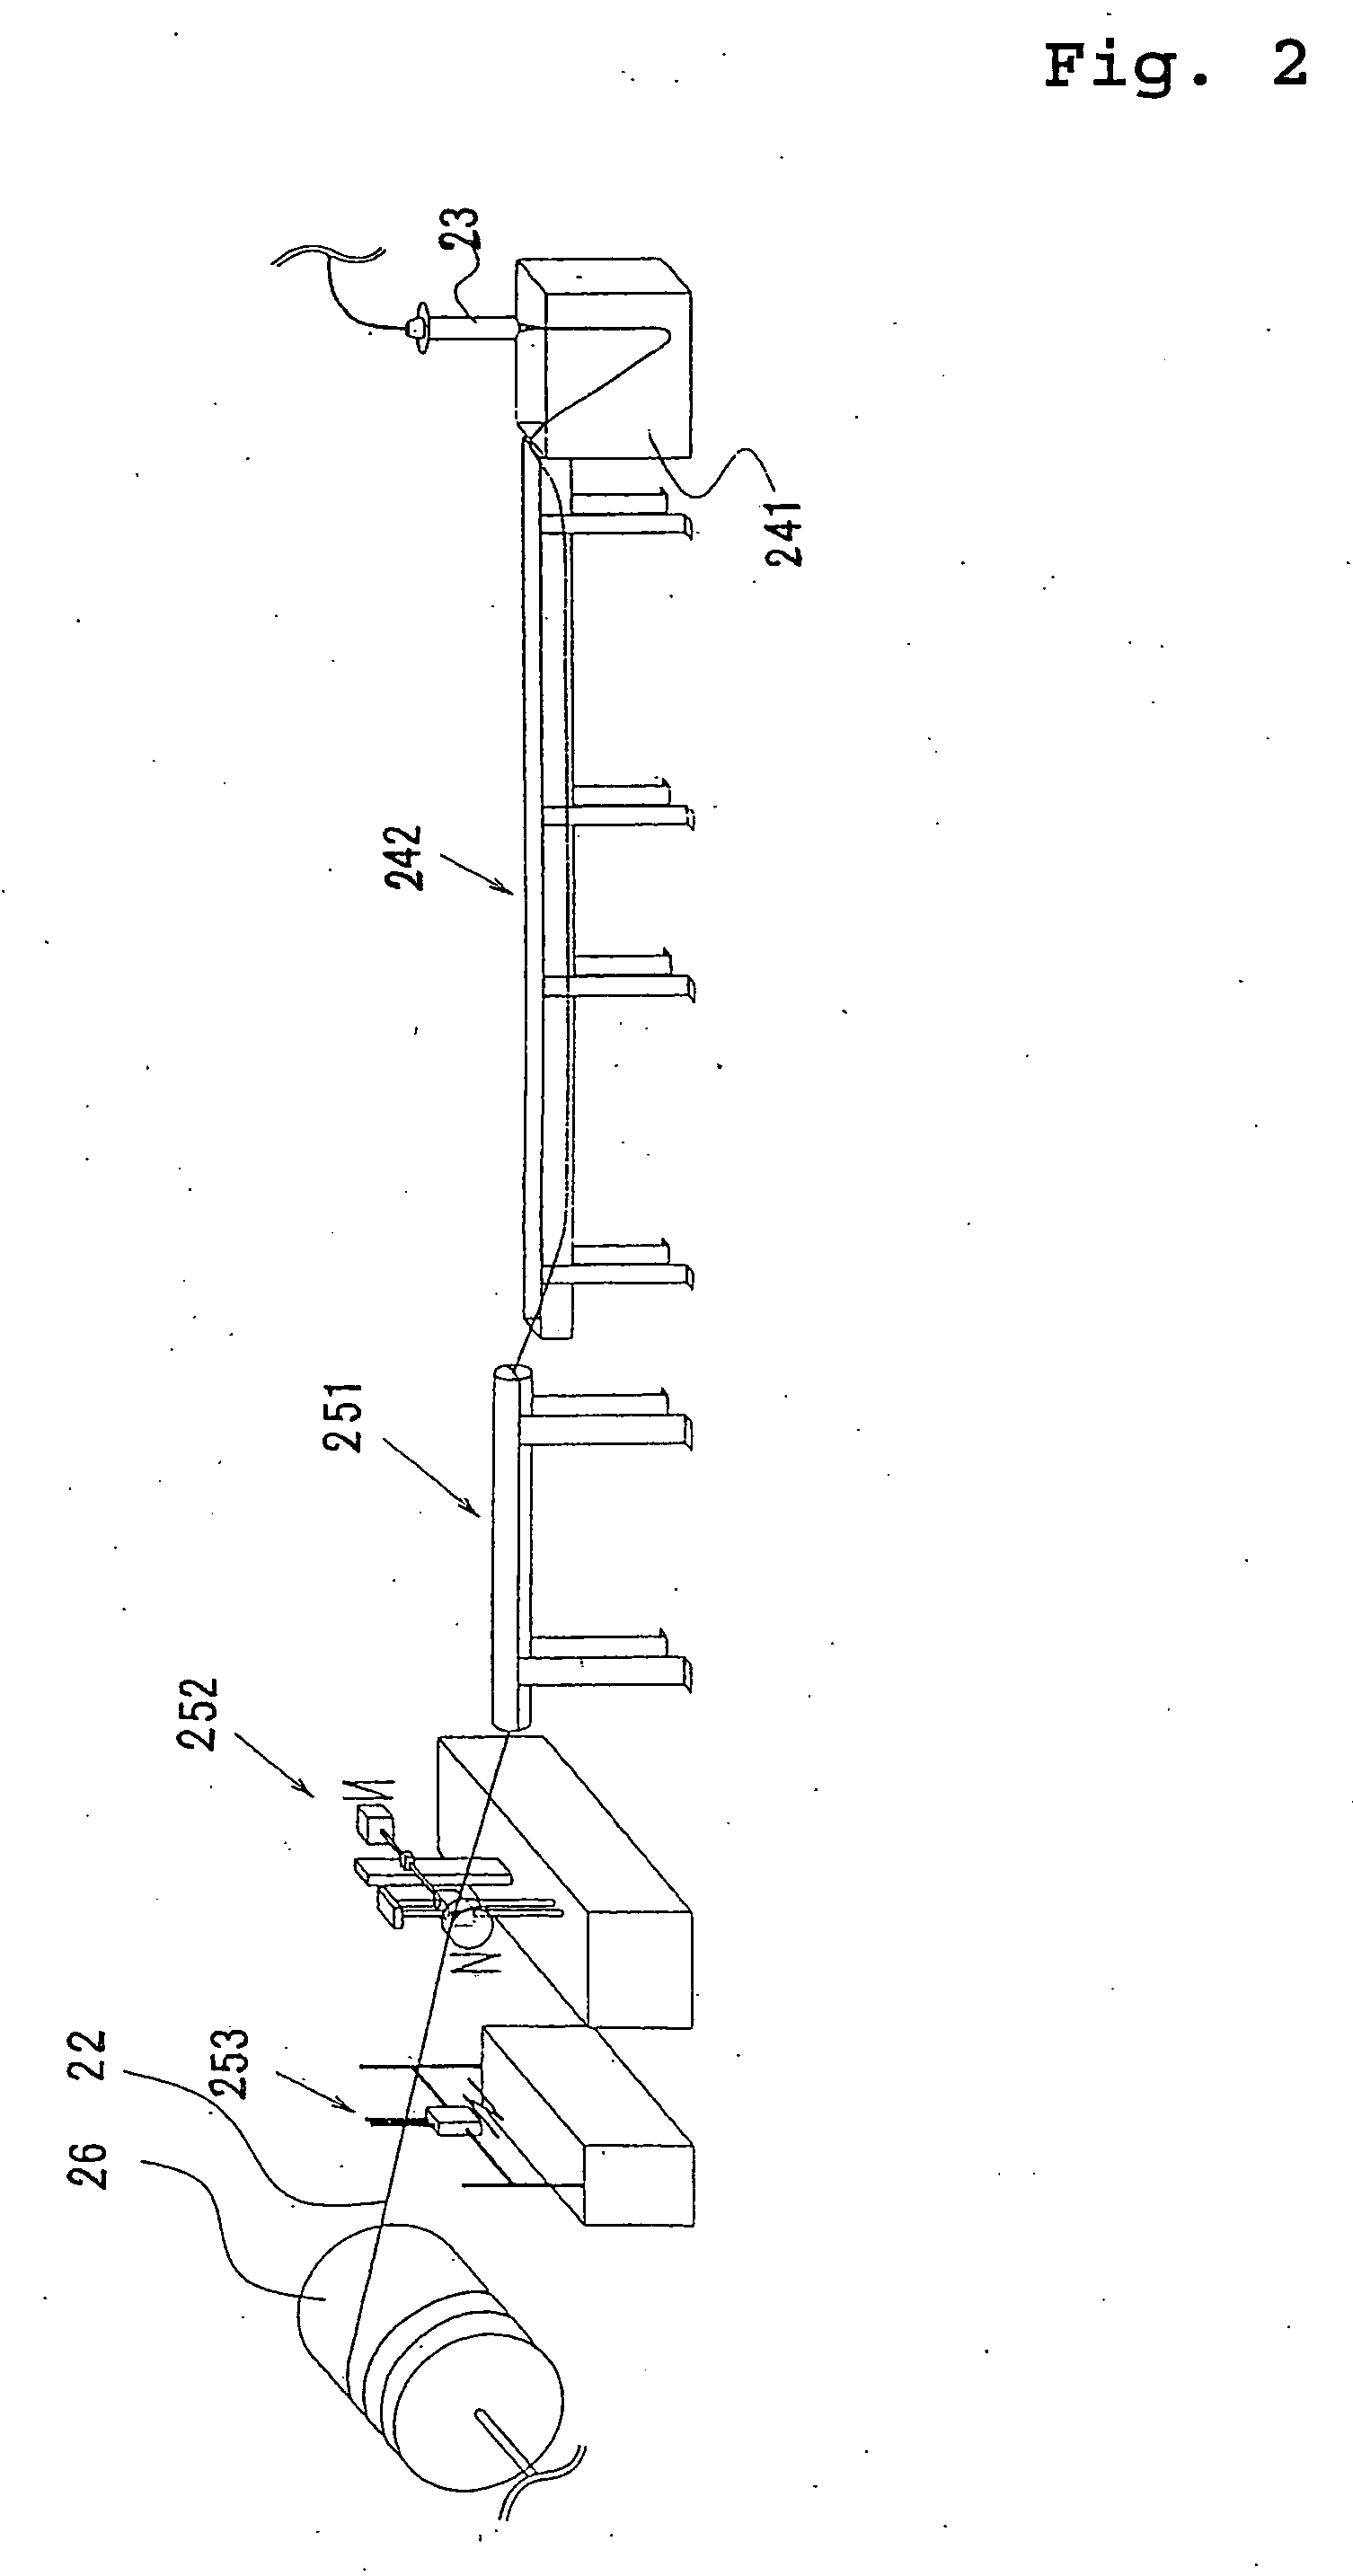 Method of preventing adhesion of membranous tissue